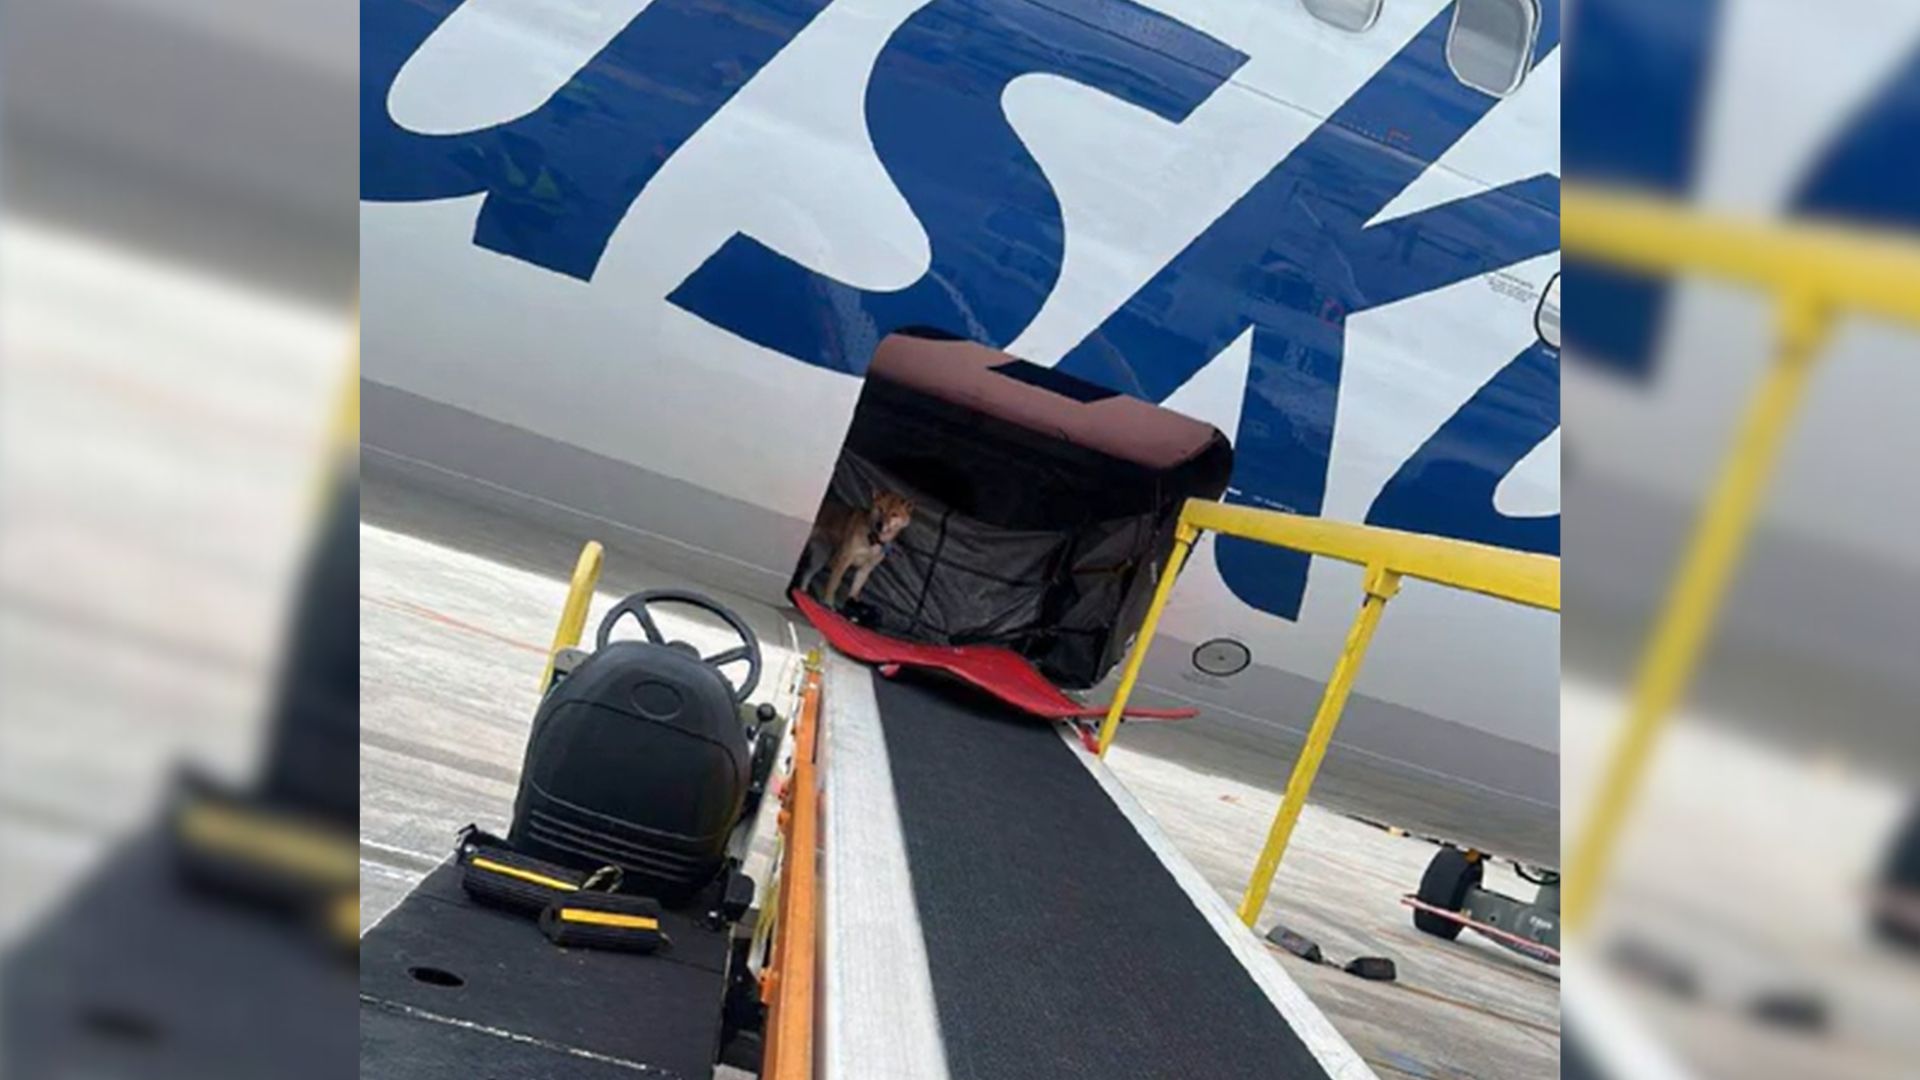 Airline Workers Were Shocked By What They Found In A Cargo Hold